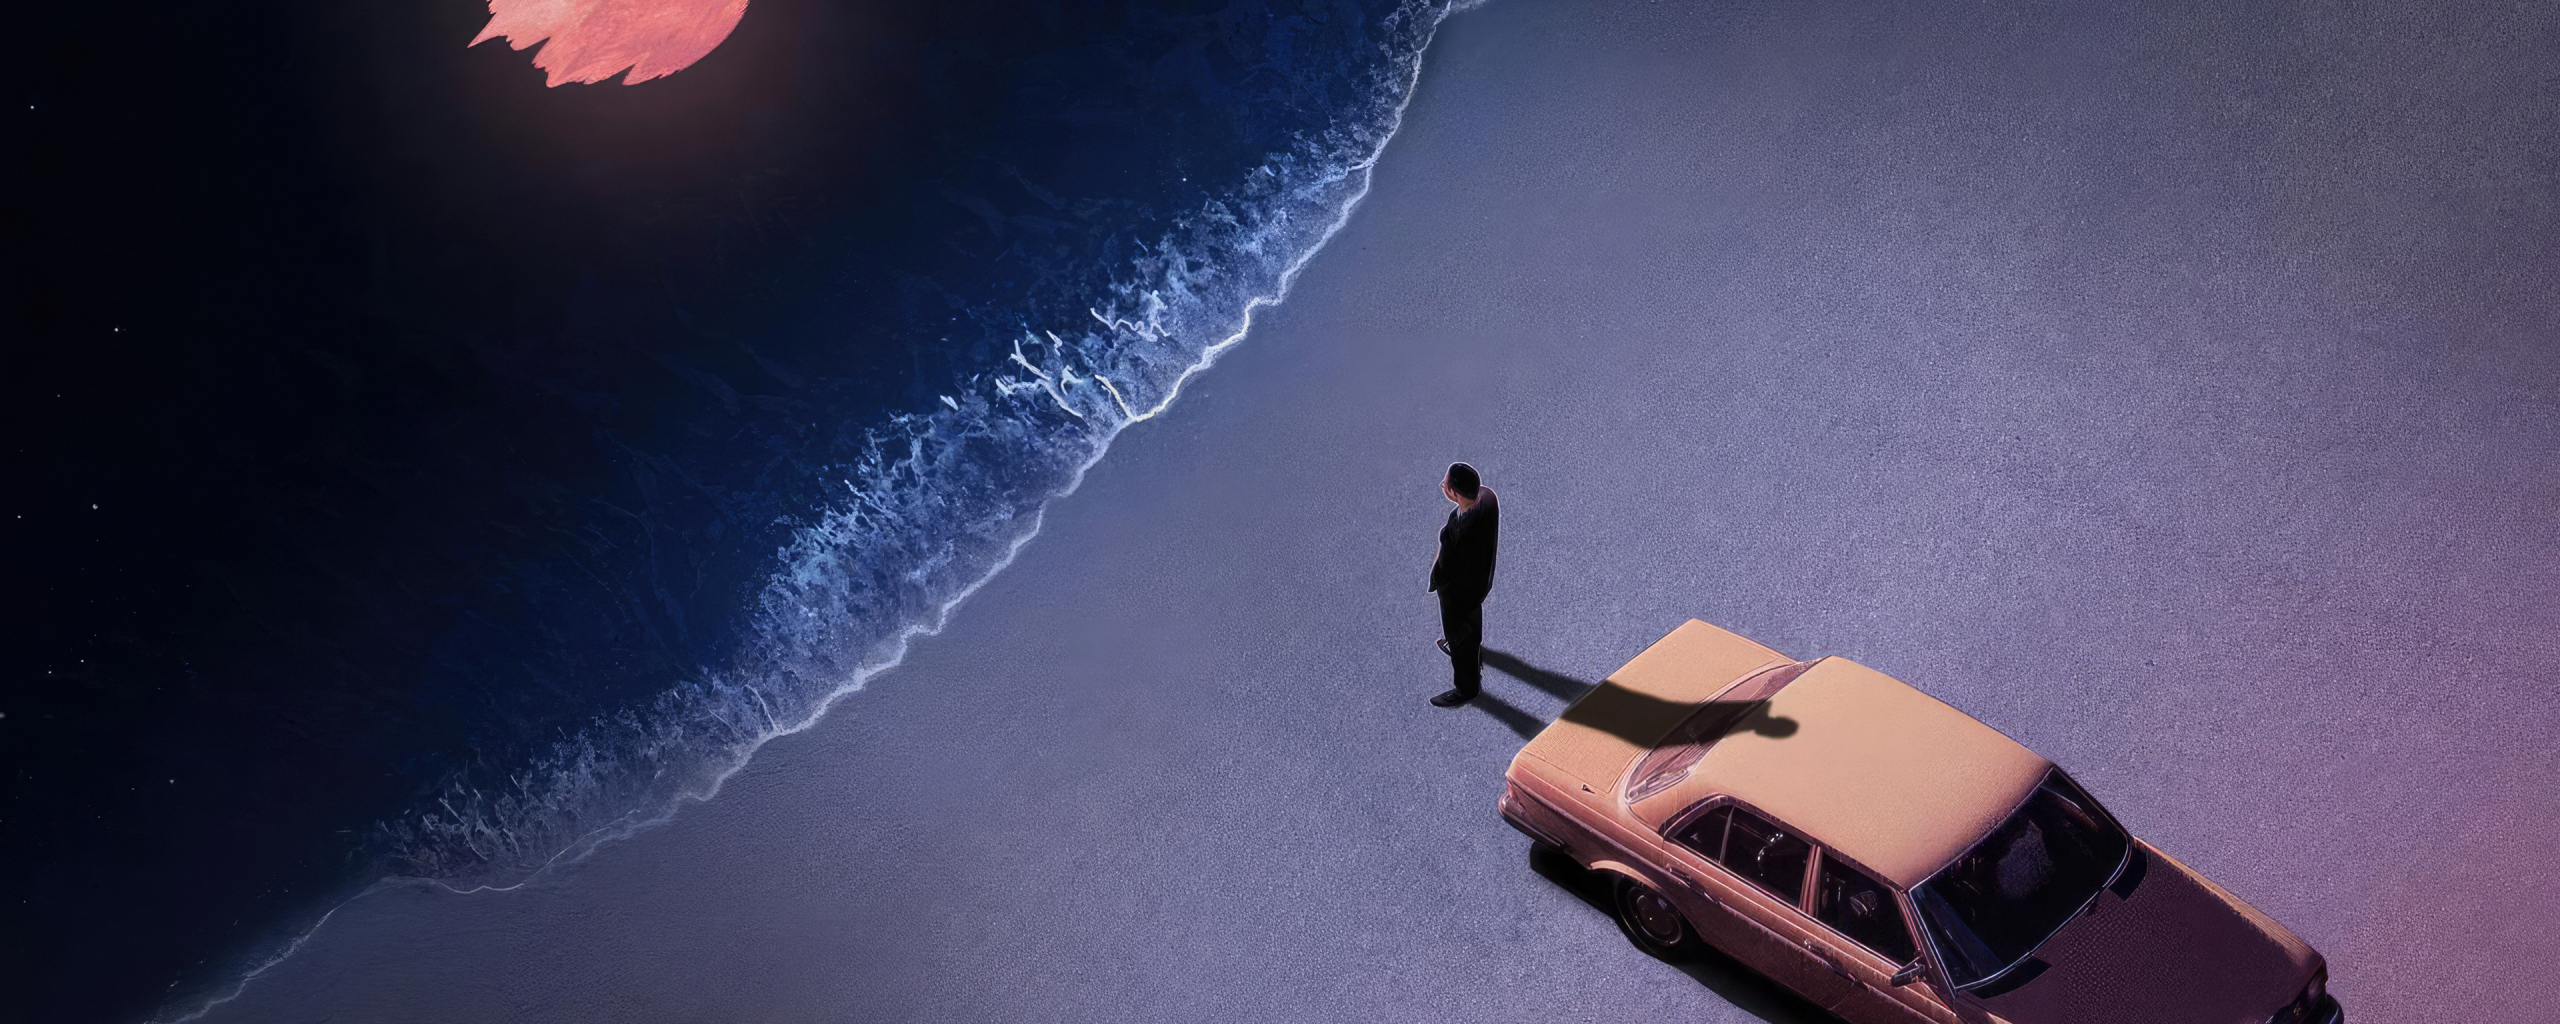 Lonely at night at the beach, car and man, art , 2560x1024 wallpaper